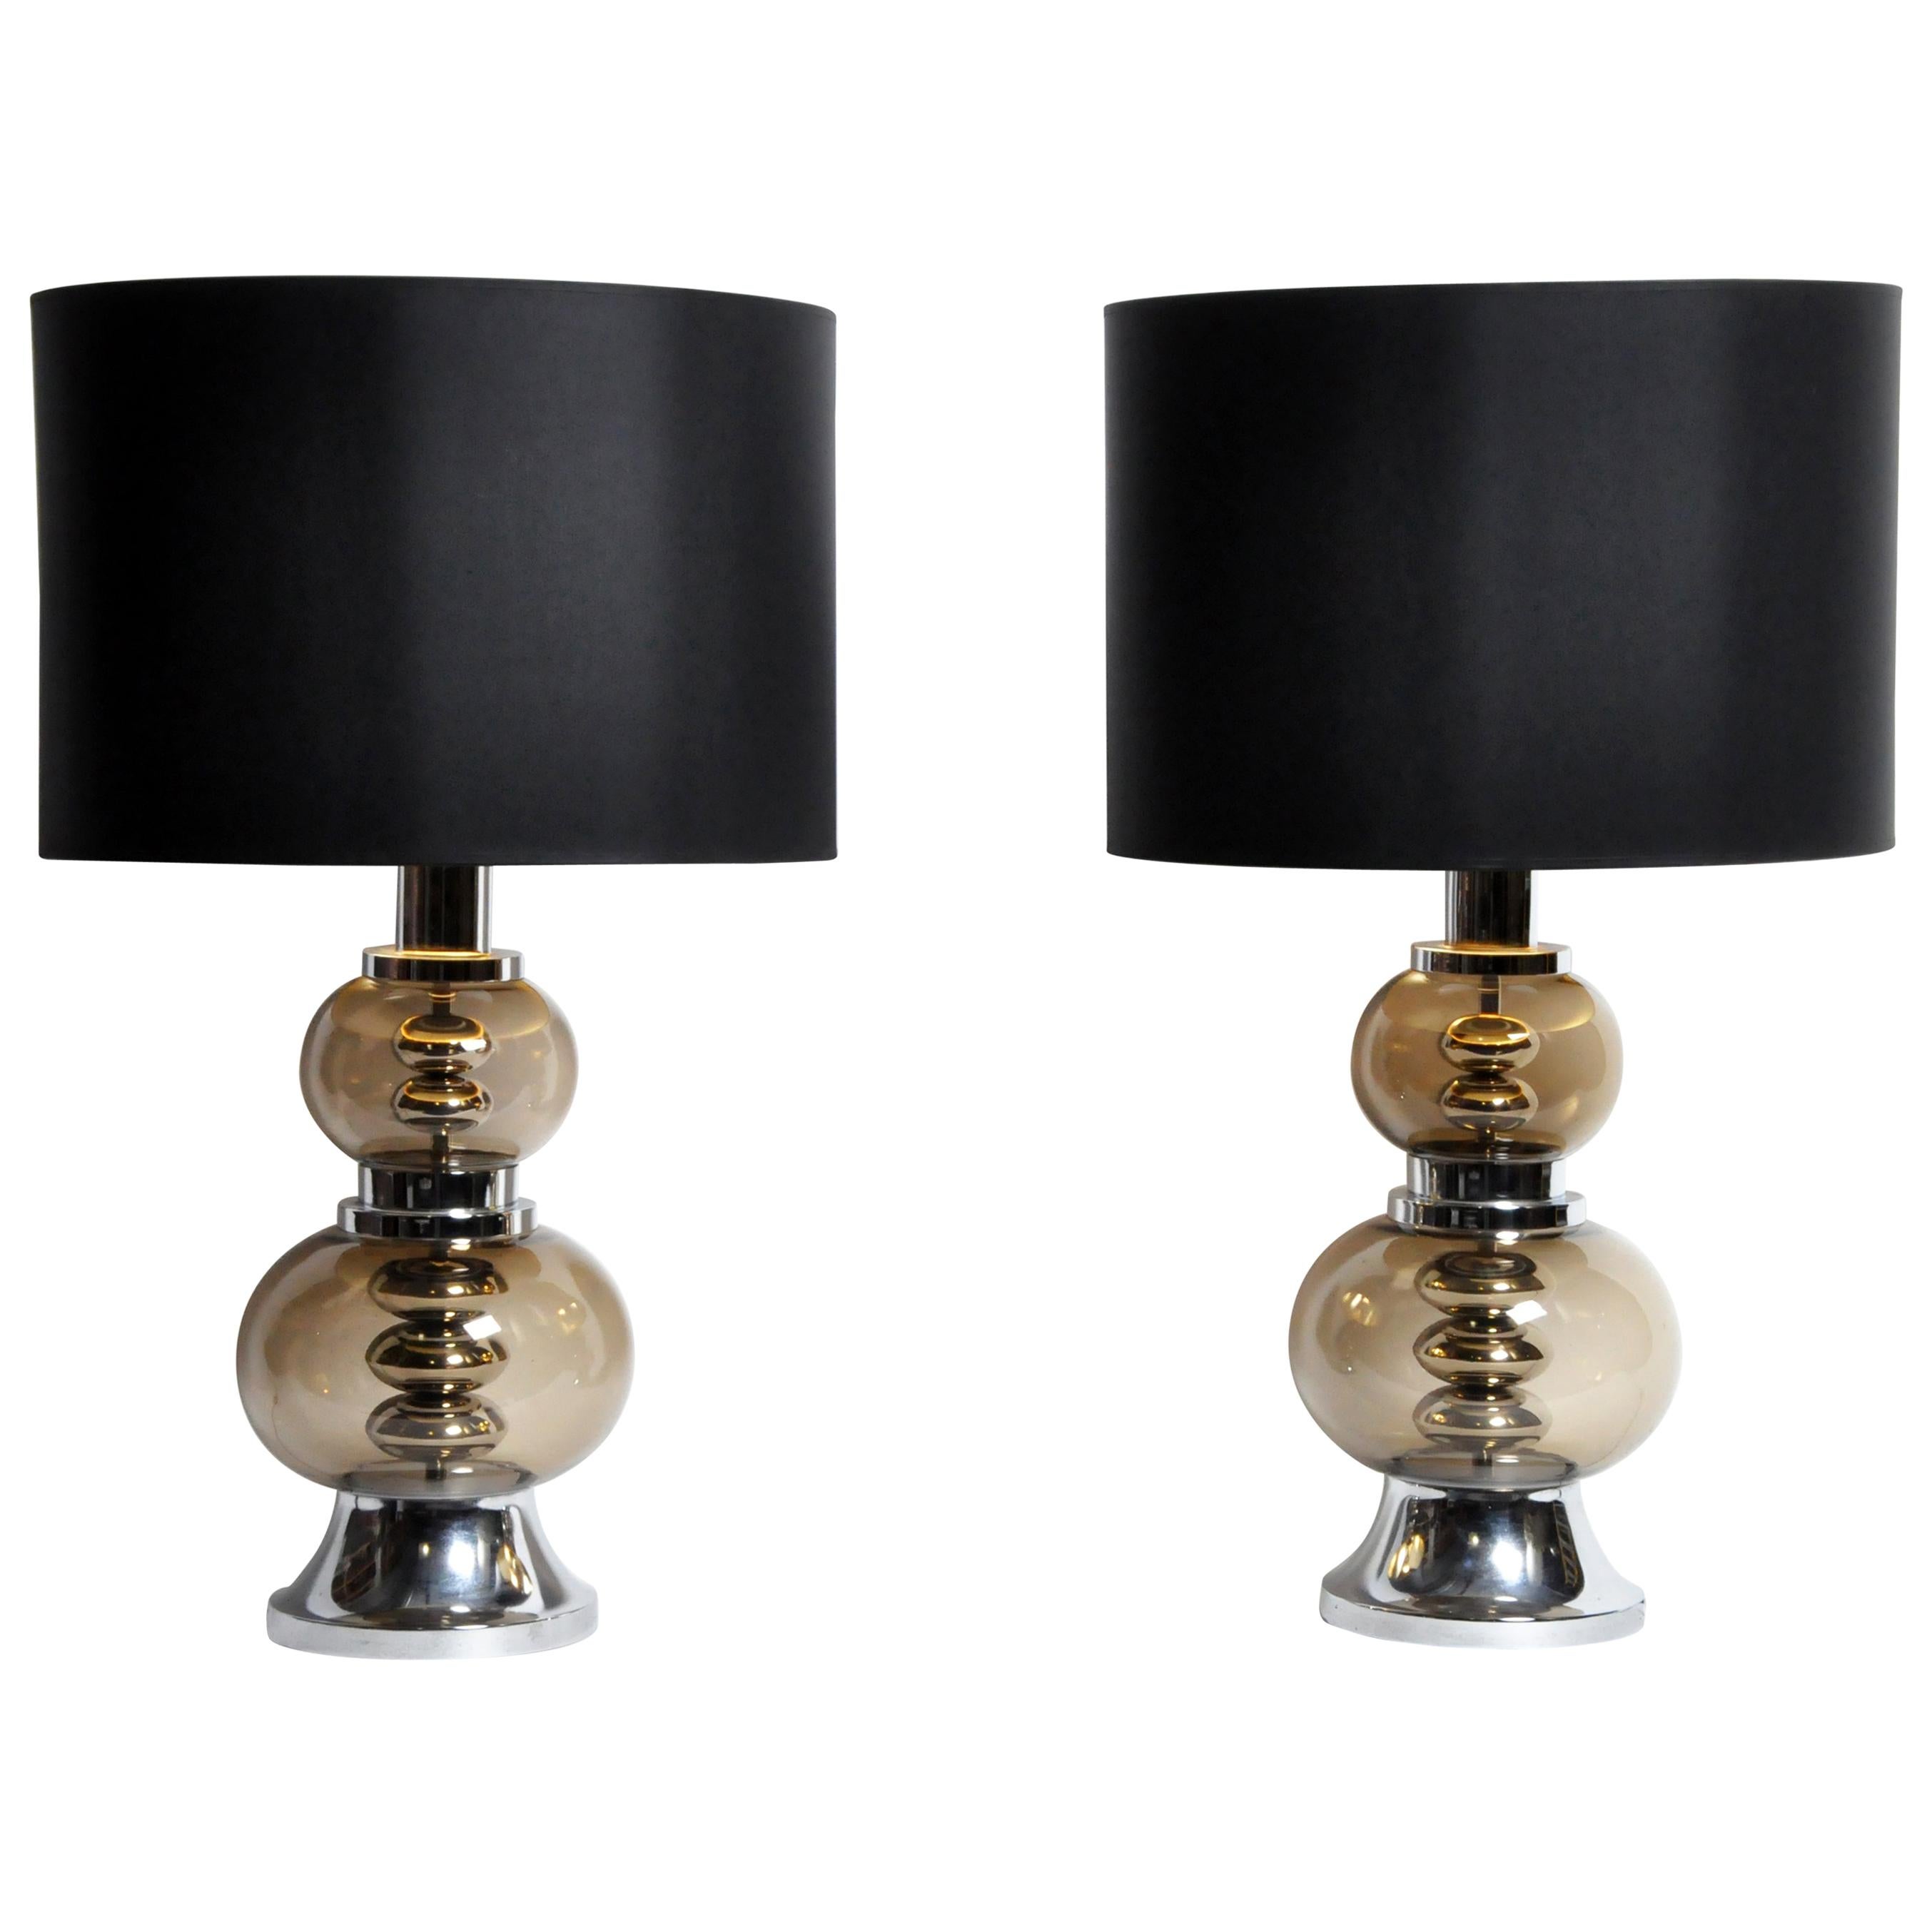 Pair of Glass and Chrome Table Lamps